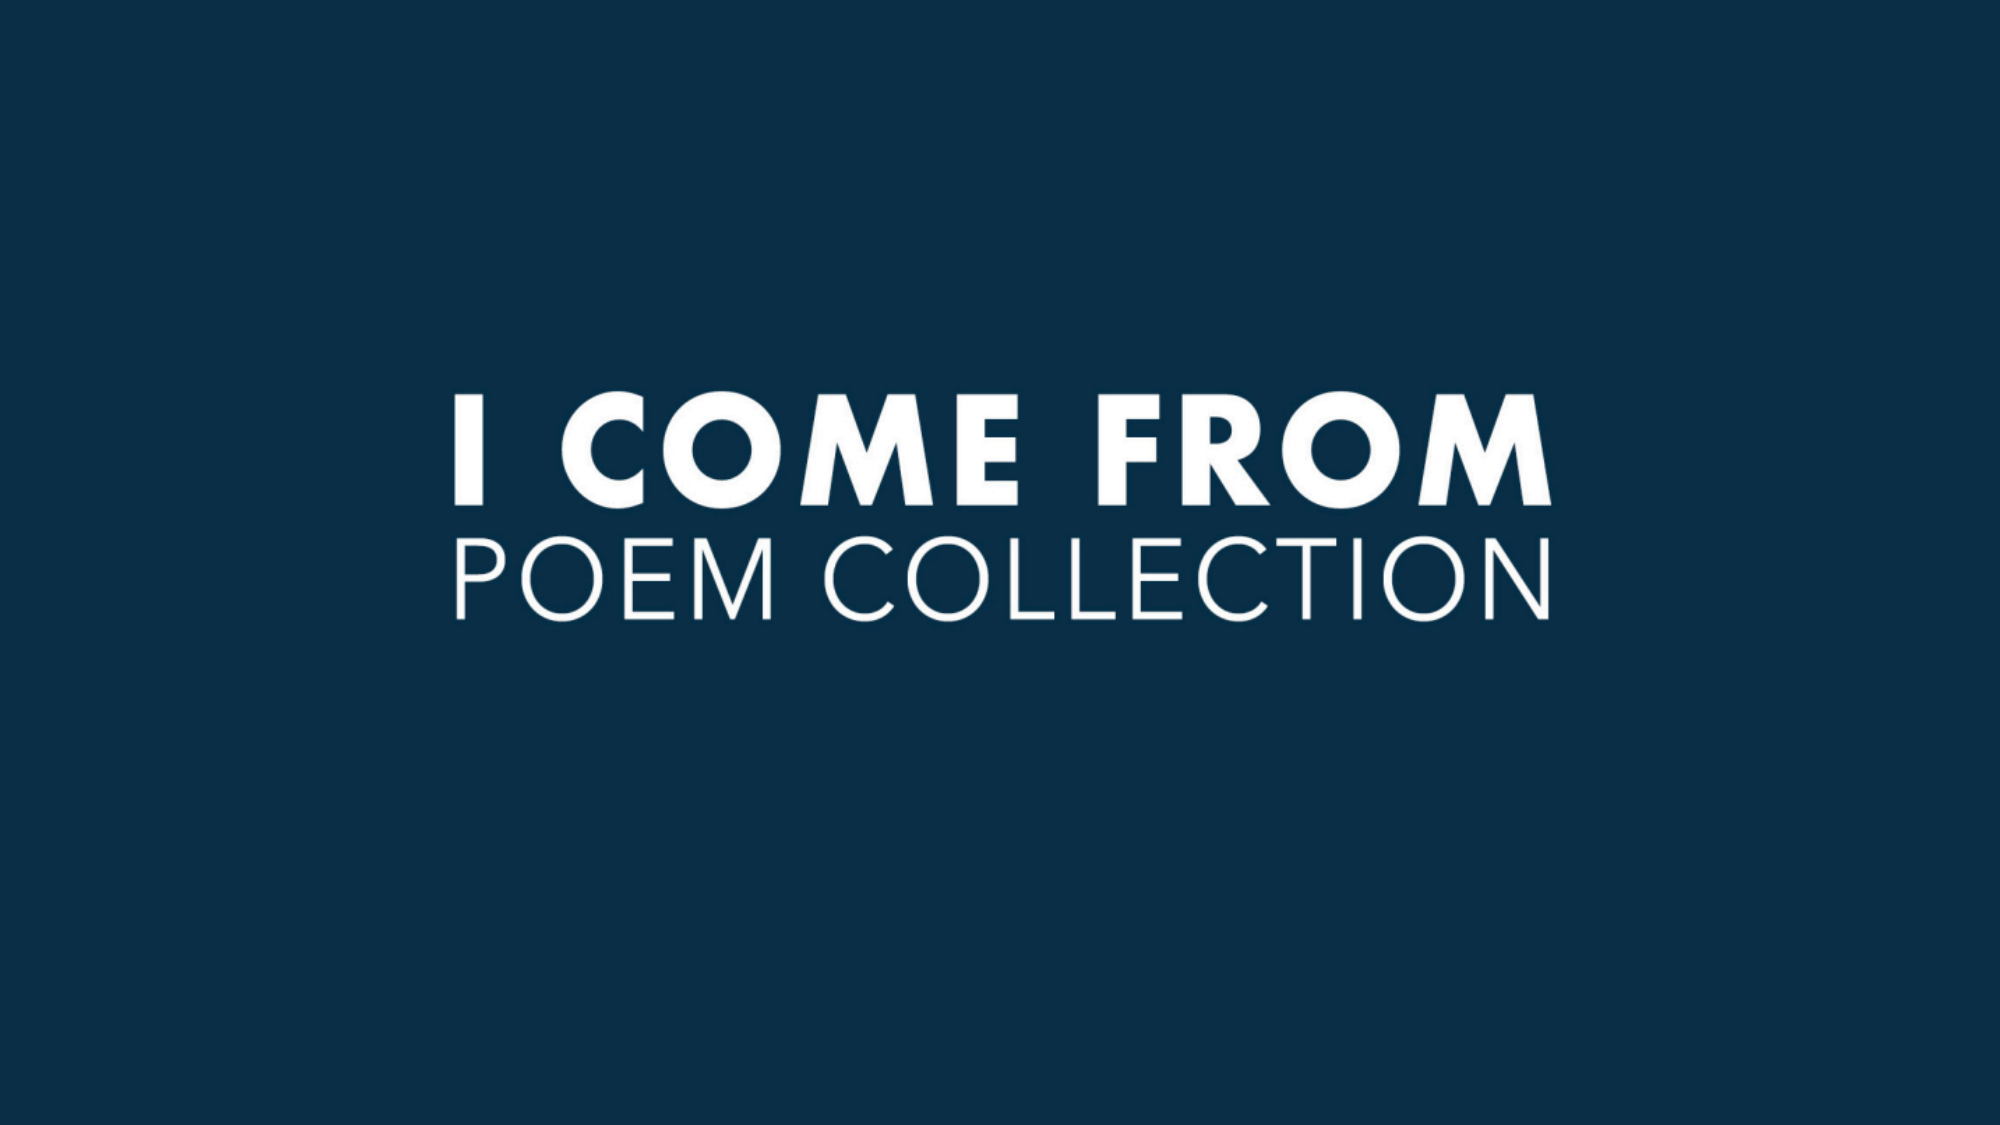 I Come From Poem Collection